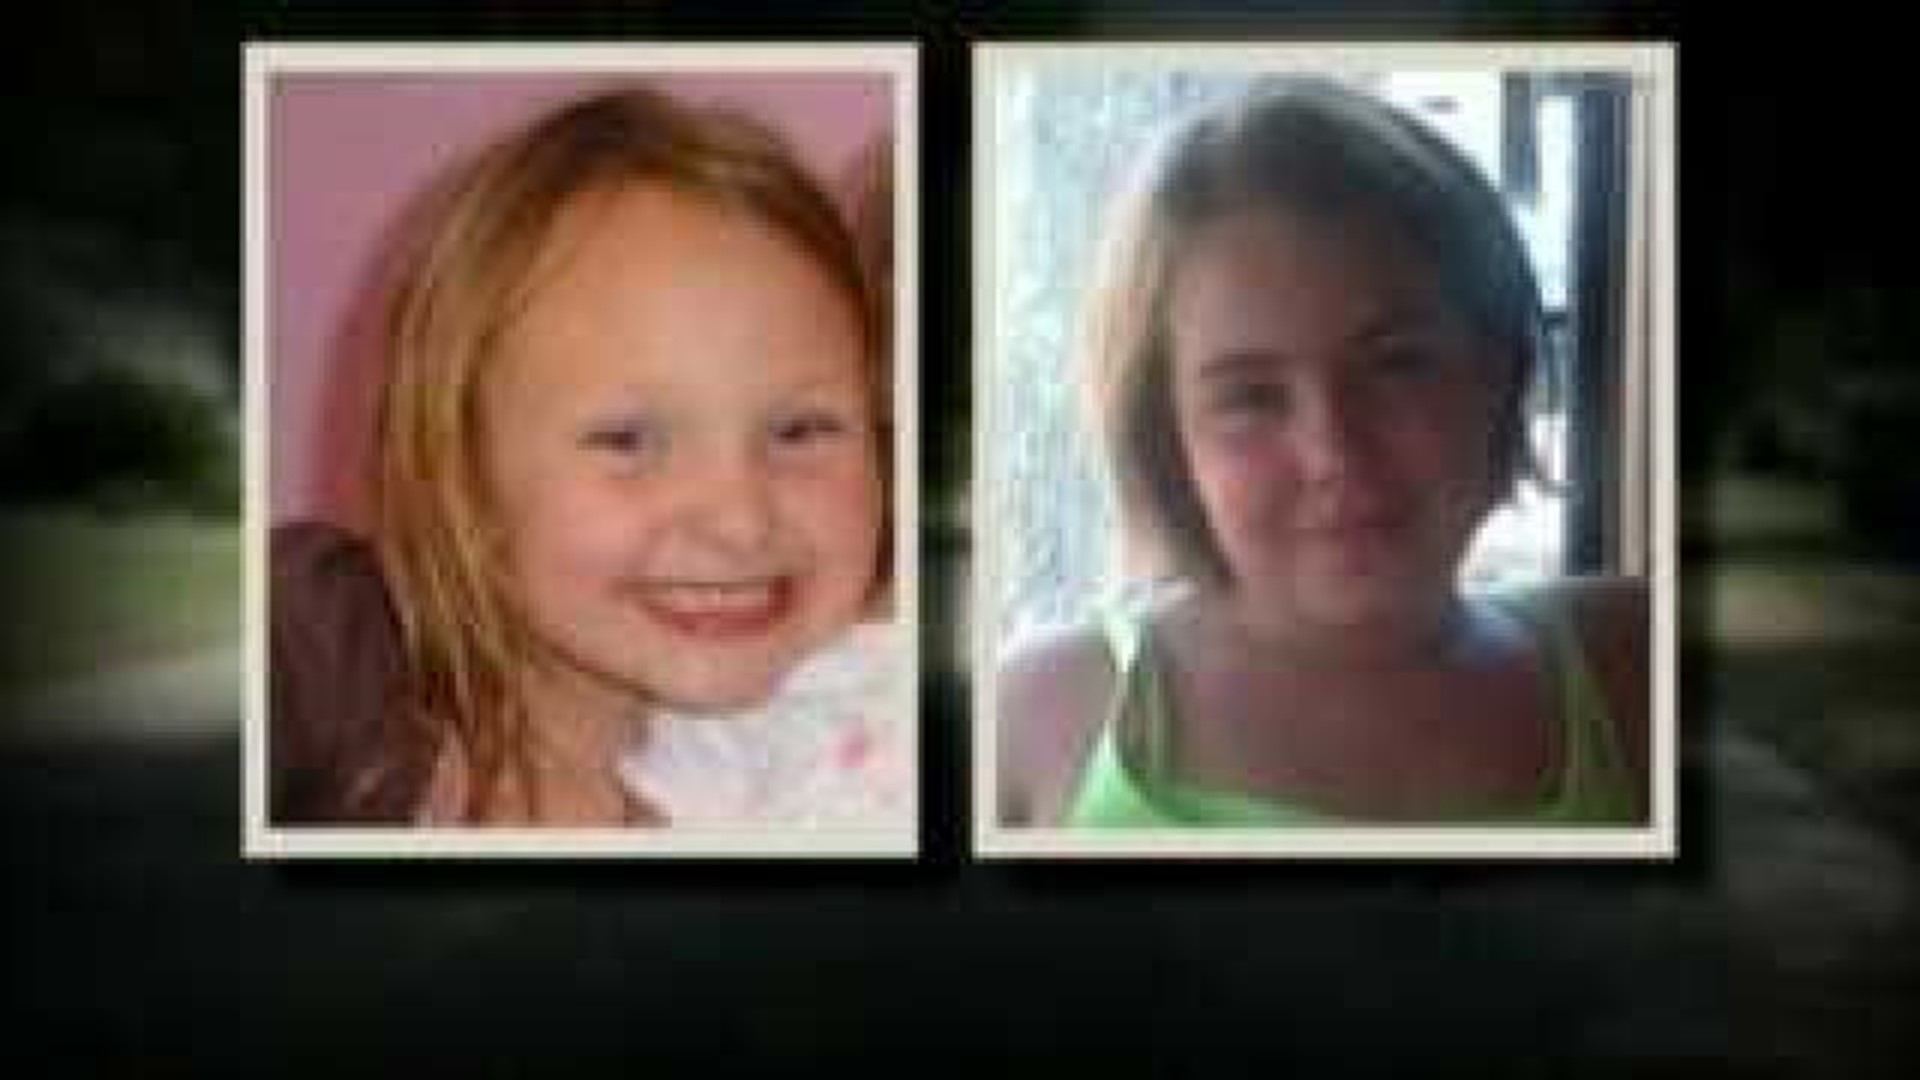 Hunters find bodies thought to be missing Iowa girls